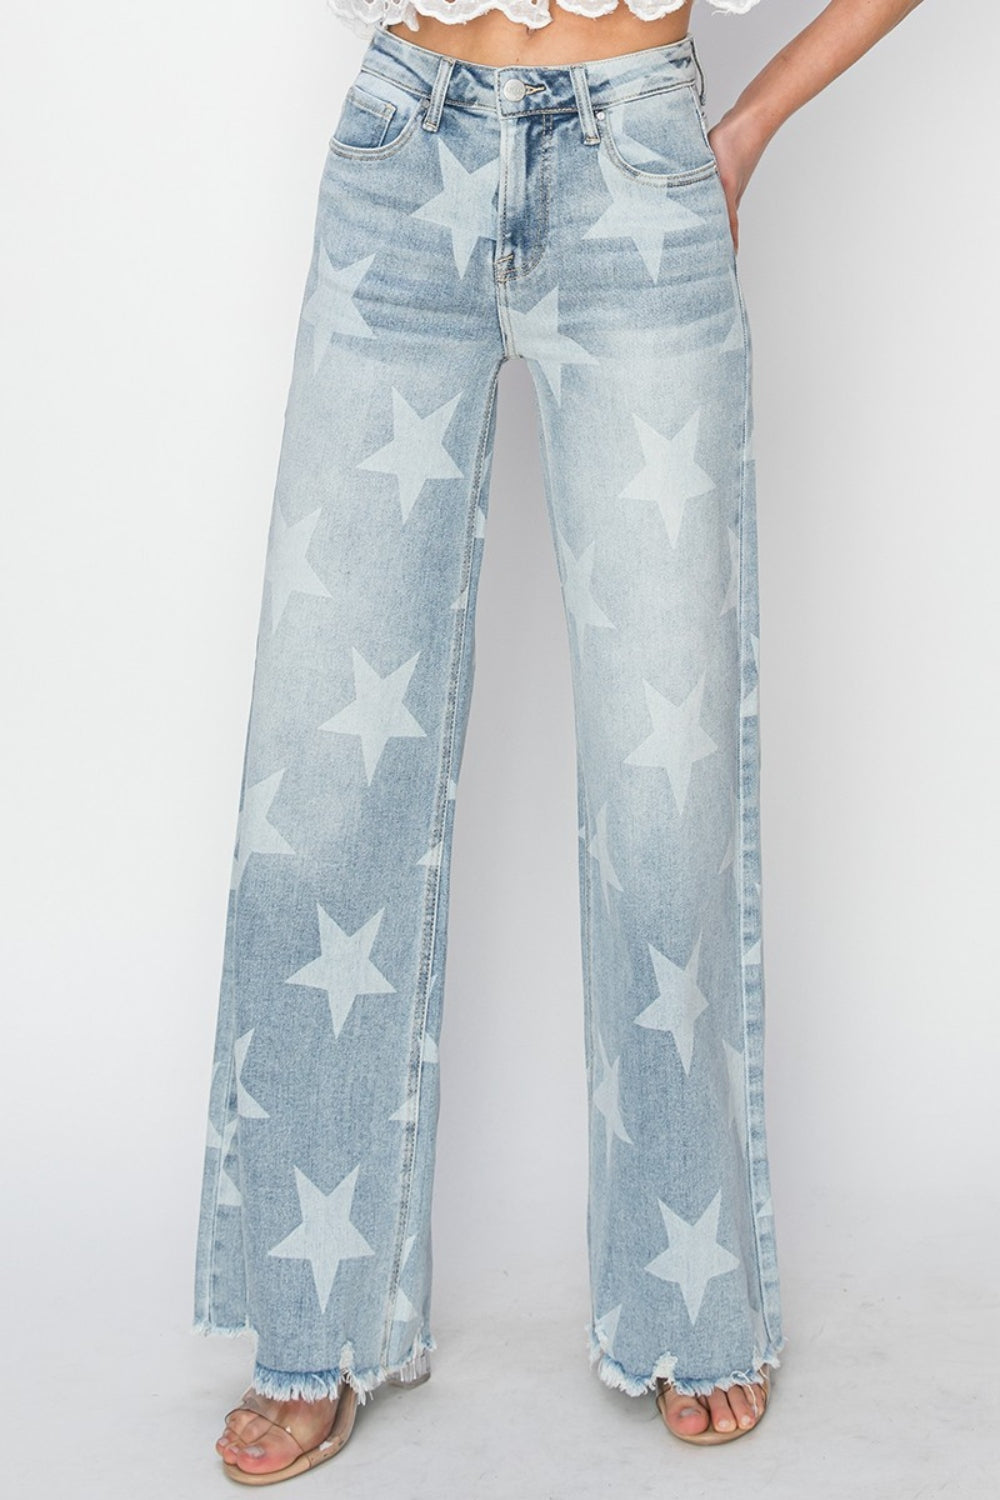 The Raw Hem Star Wide Leg Jeans are a fashionable and eye-catching choice for those looking to make a statement with their outfit. The raw hem detail gives these jeans a casual and edgy vibe, while the star embellishments add a touch of whimsical charm. The wide leg silhouette offers a comfortable and flattering fit, making them a versatile piece that can be dressed up or down. S-3X